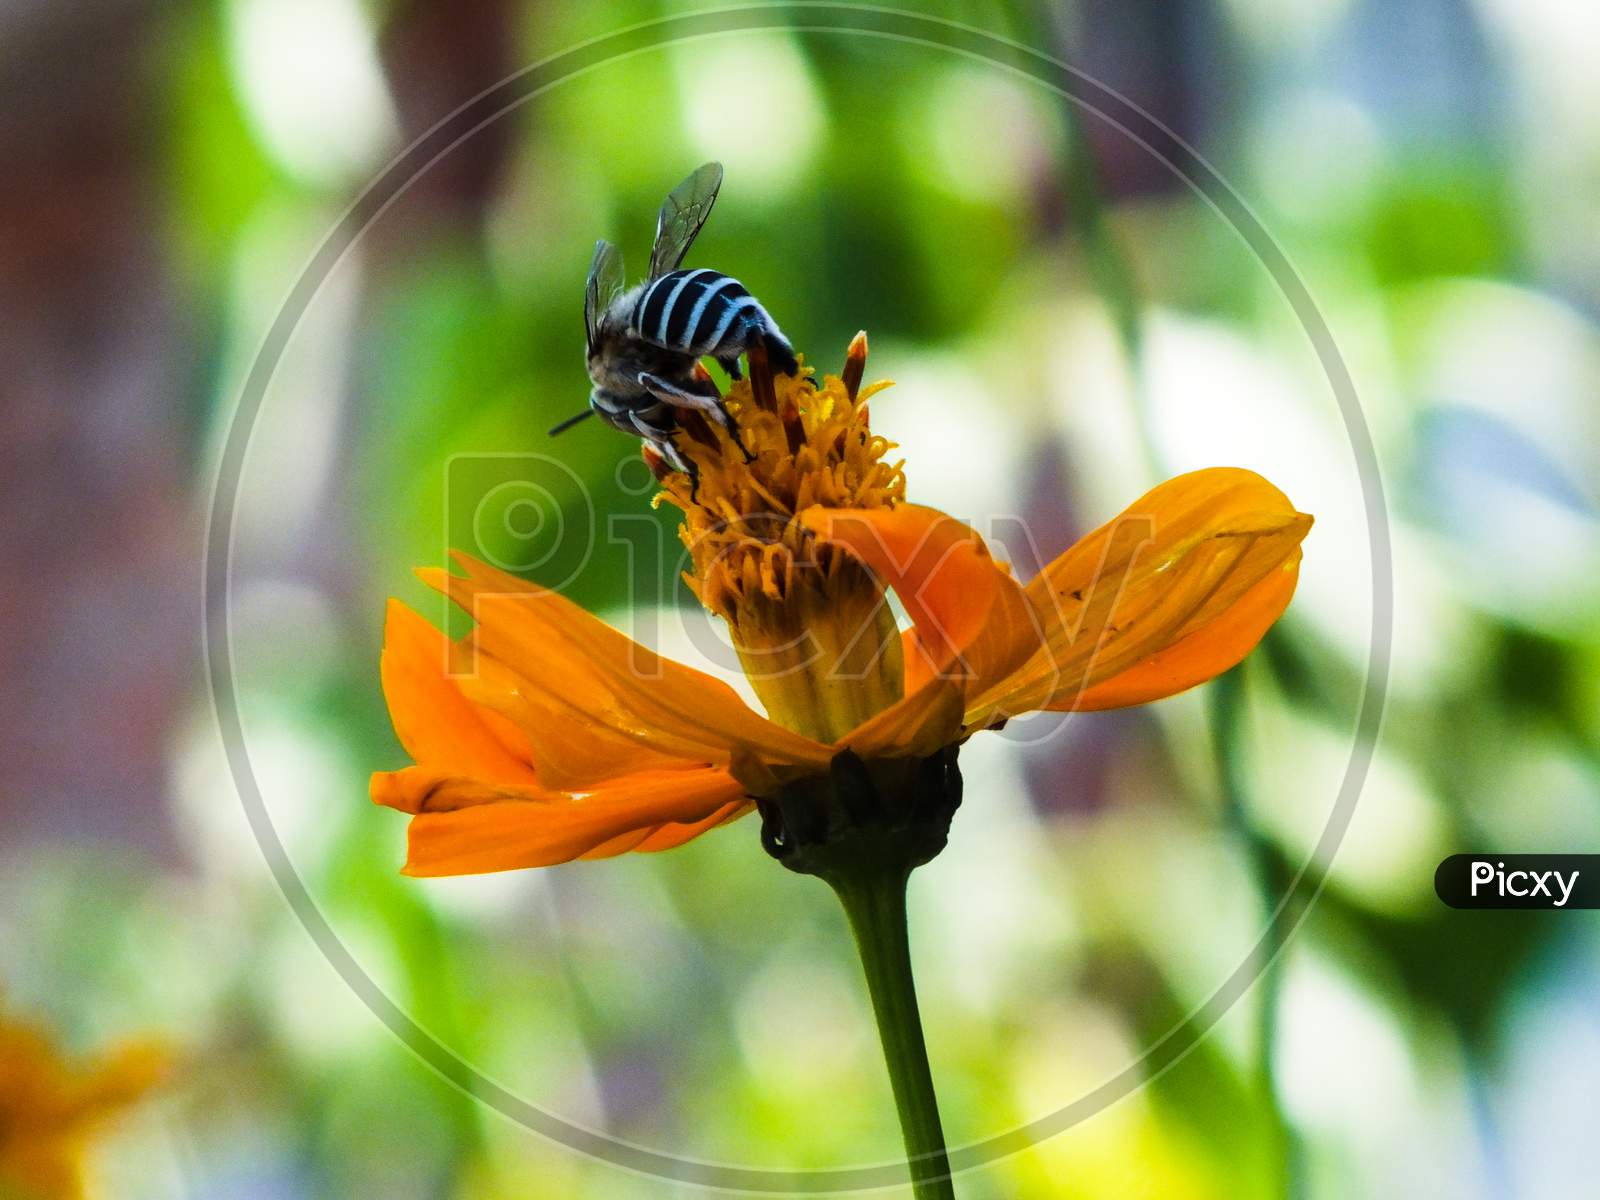 A Hungry Humble bee searching for nectar.